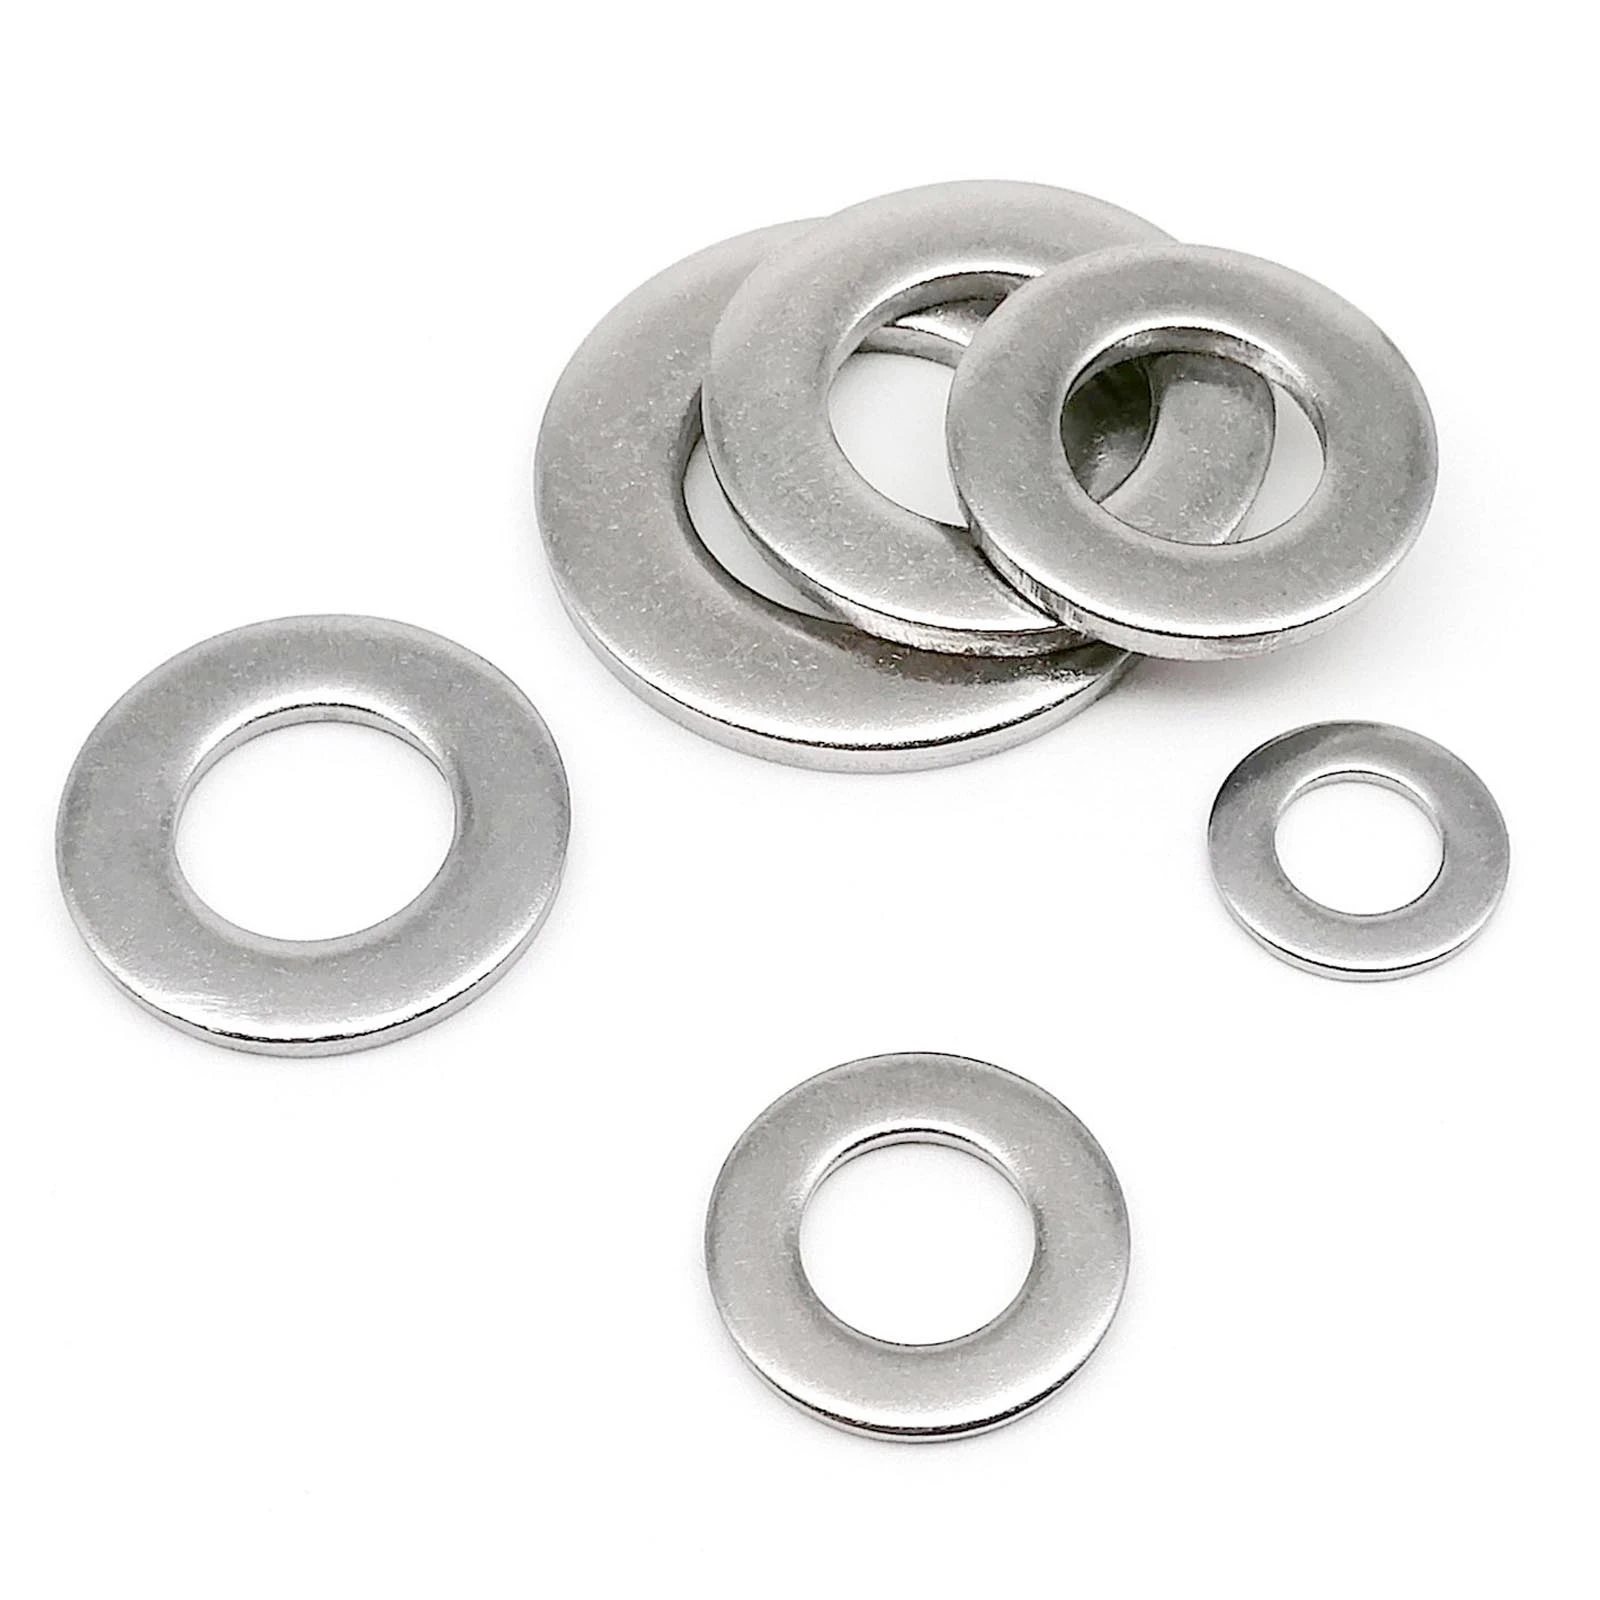 2/5/10/50/100pcs GB97 A2 304 Stainless Steel Flat Washer Plain Gasket for M1.6 M2 M2.5 M3 M4 M5 M6 M8 M10 M12 M16 M24 Screw Bolt